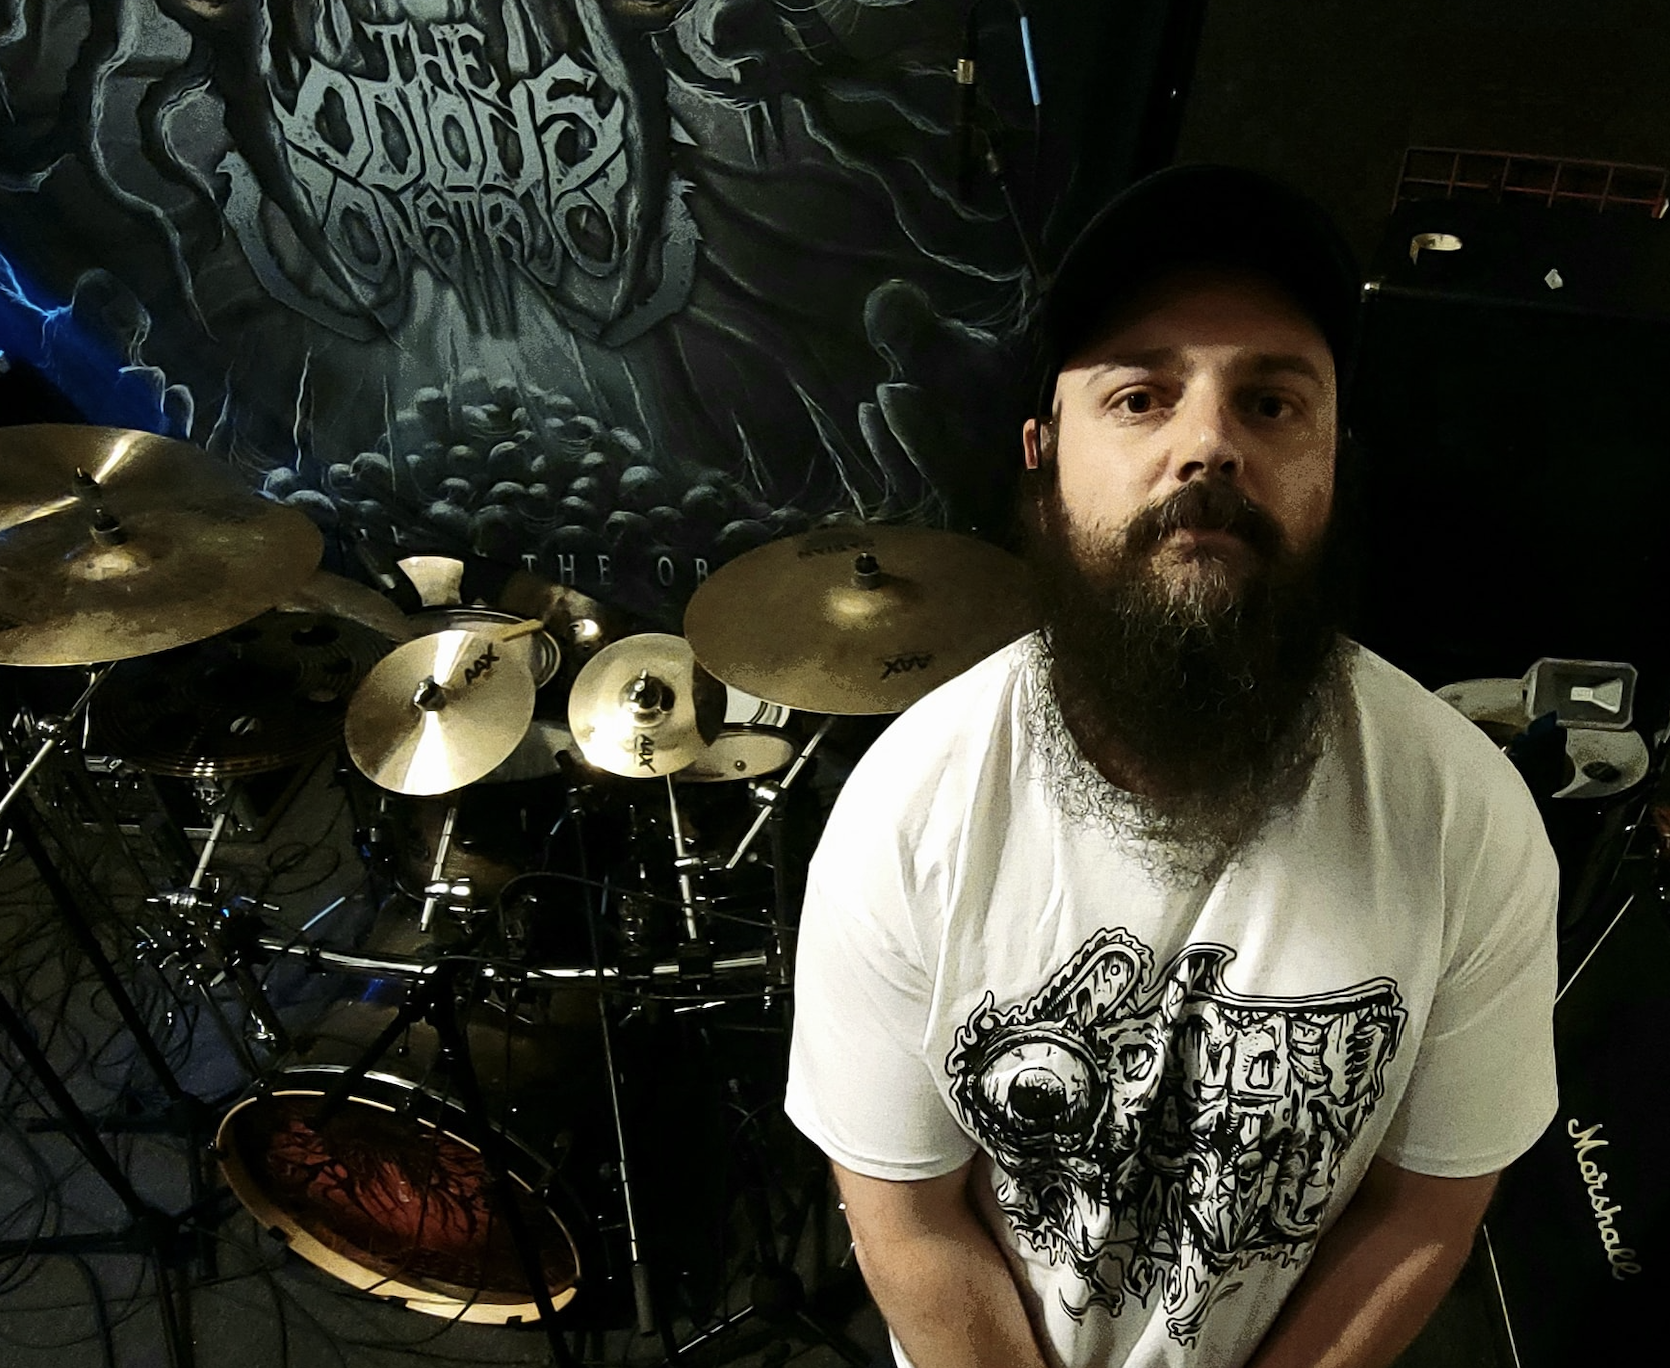 kenneth-brand-odious-construct-sick-drummer-magazine-2022-1